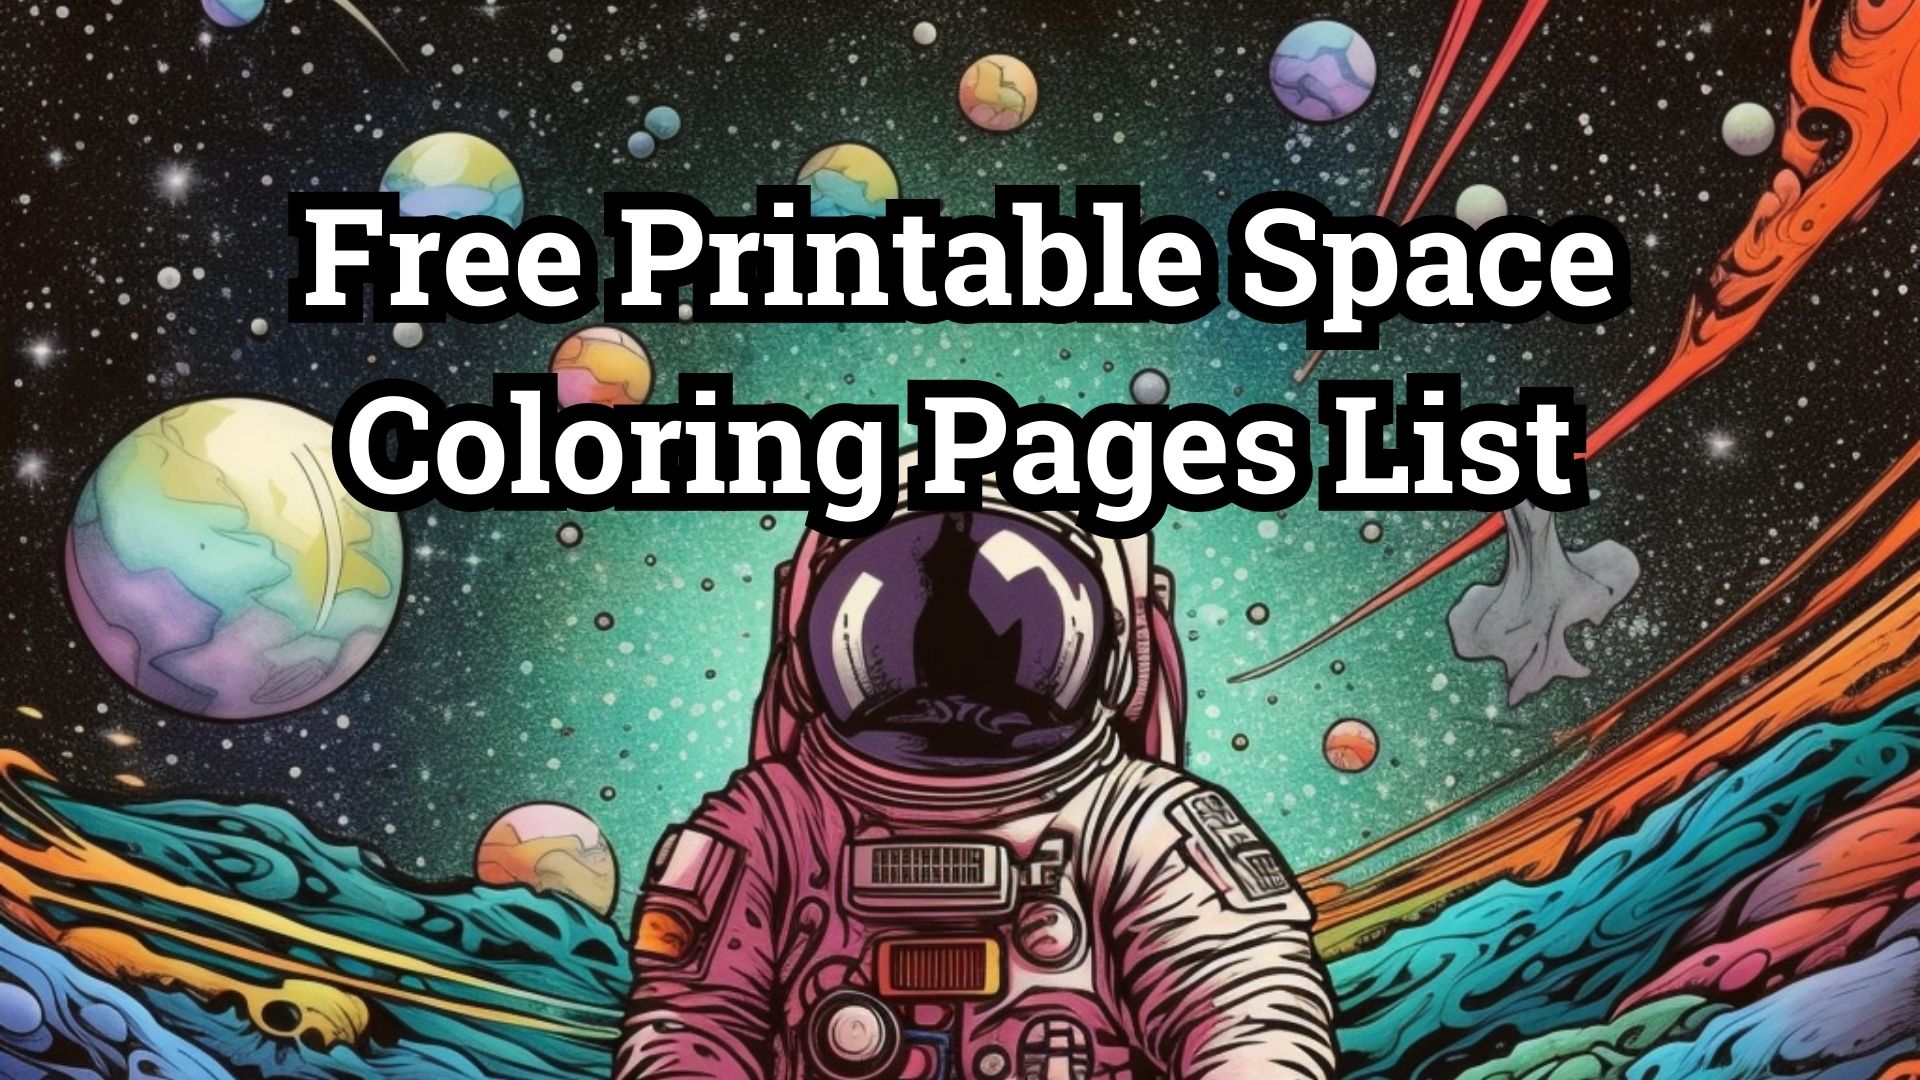 Free Printable Space Coloring Pages List